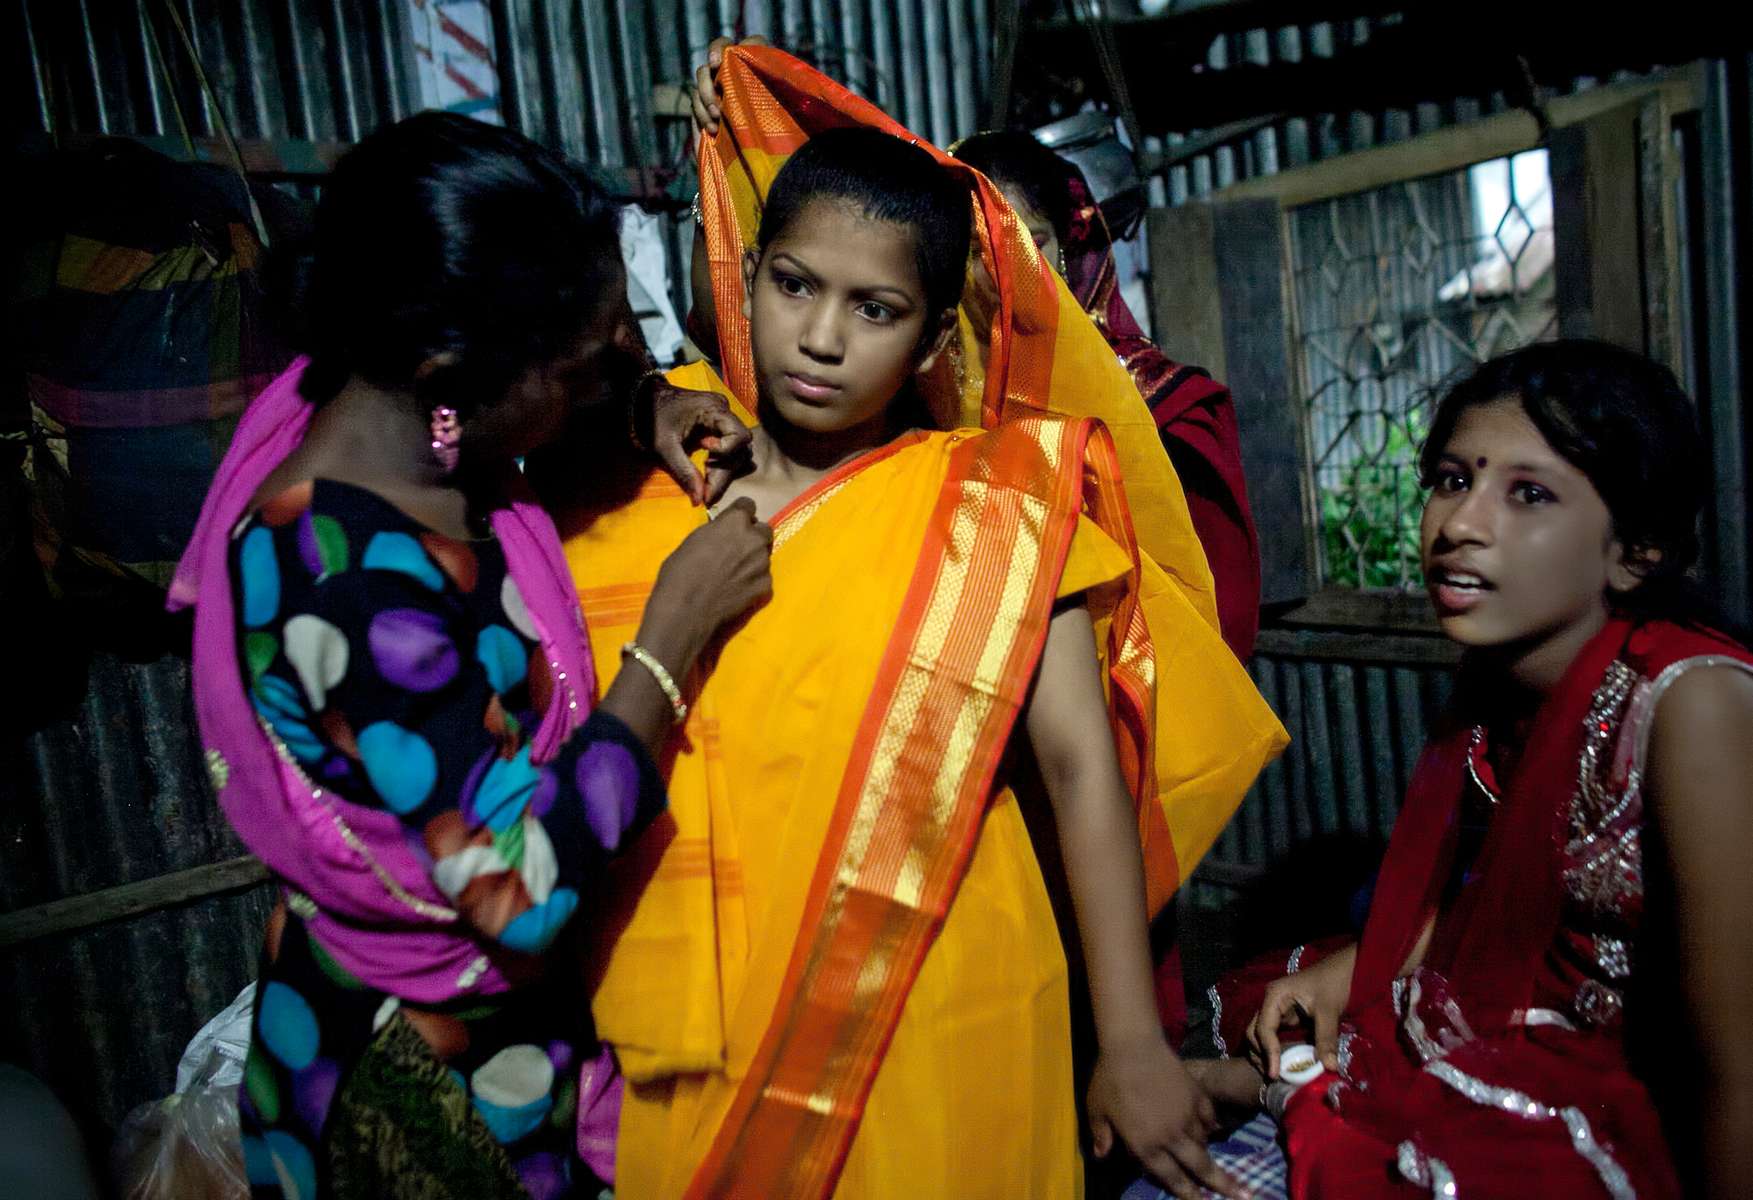 13 year old Runa Akhter is dressed for her holud ceremony the night before her wedding to a 29 year old man in Manikganj, Bangladesh. Runa was in the 7th grade, and loved reading, sports and traveling. She wanted to wait until she was 21 to get married but, {quote}No boy want's to marry a girl older than 18 in my village{quote} she said. 